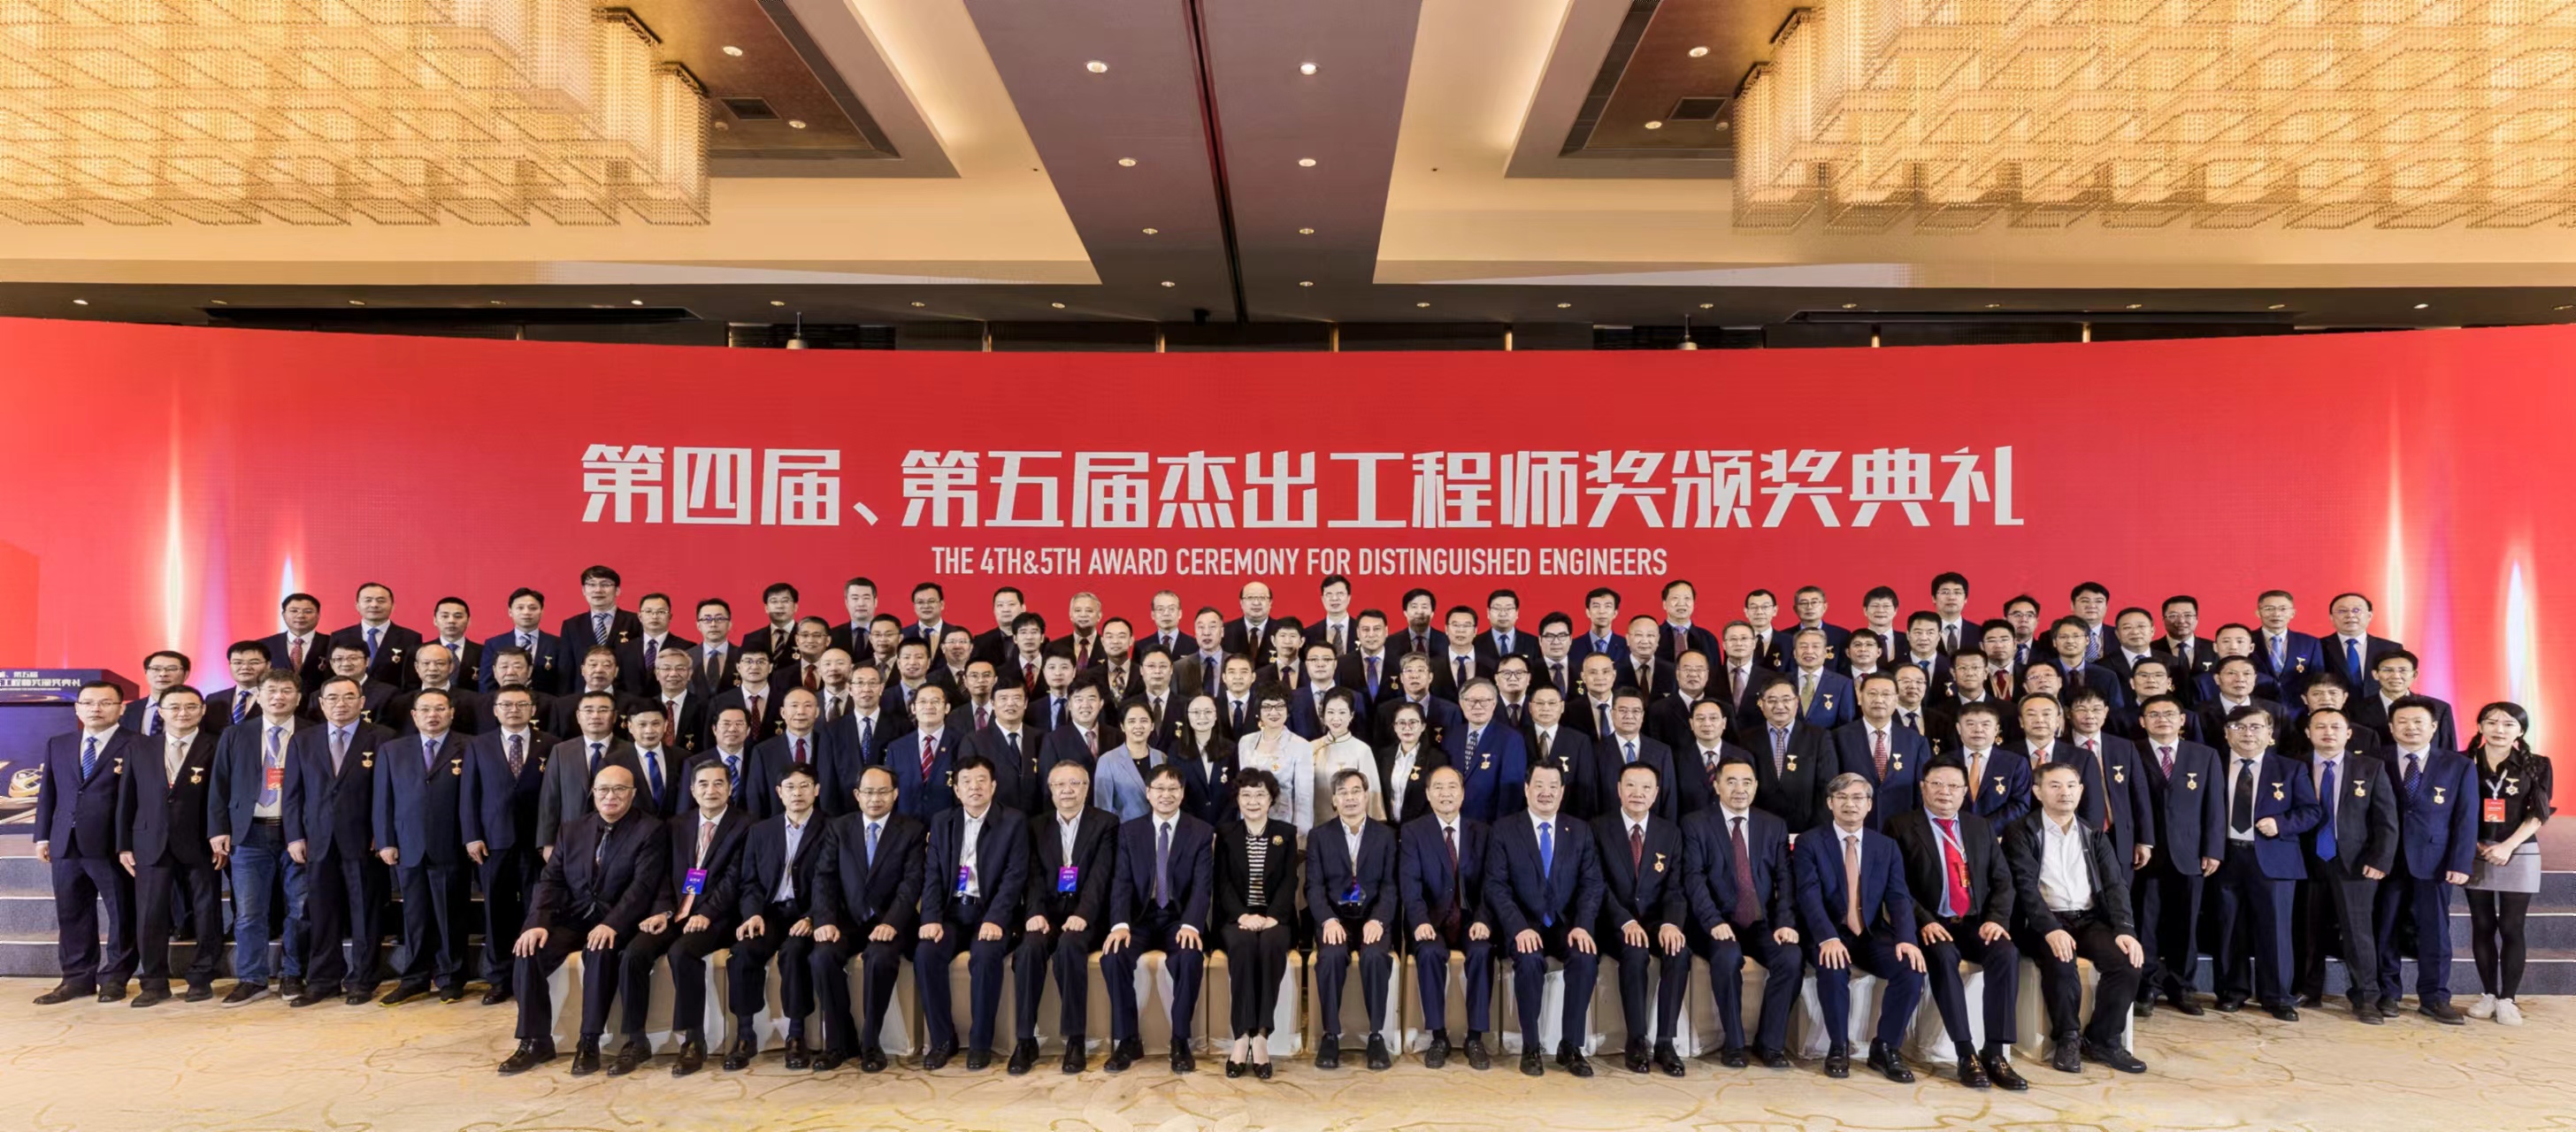 The Fourth and Fifth Distinguished Engineer Awards Ceremonies hosted by ISEFC were grandly held in Nanjing